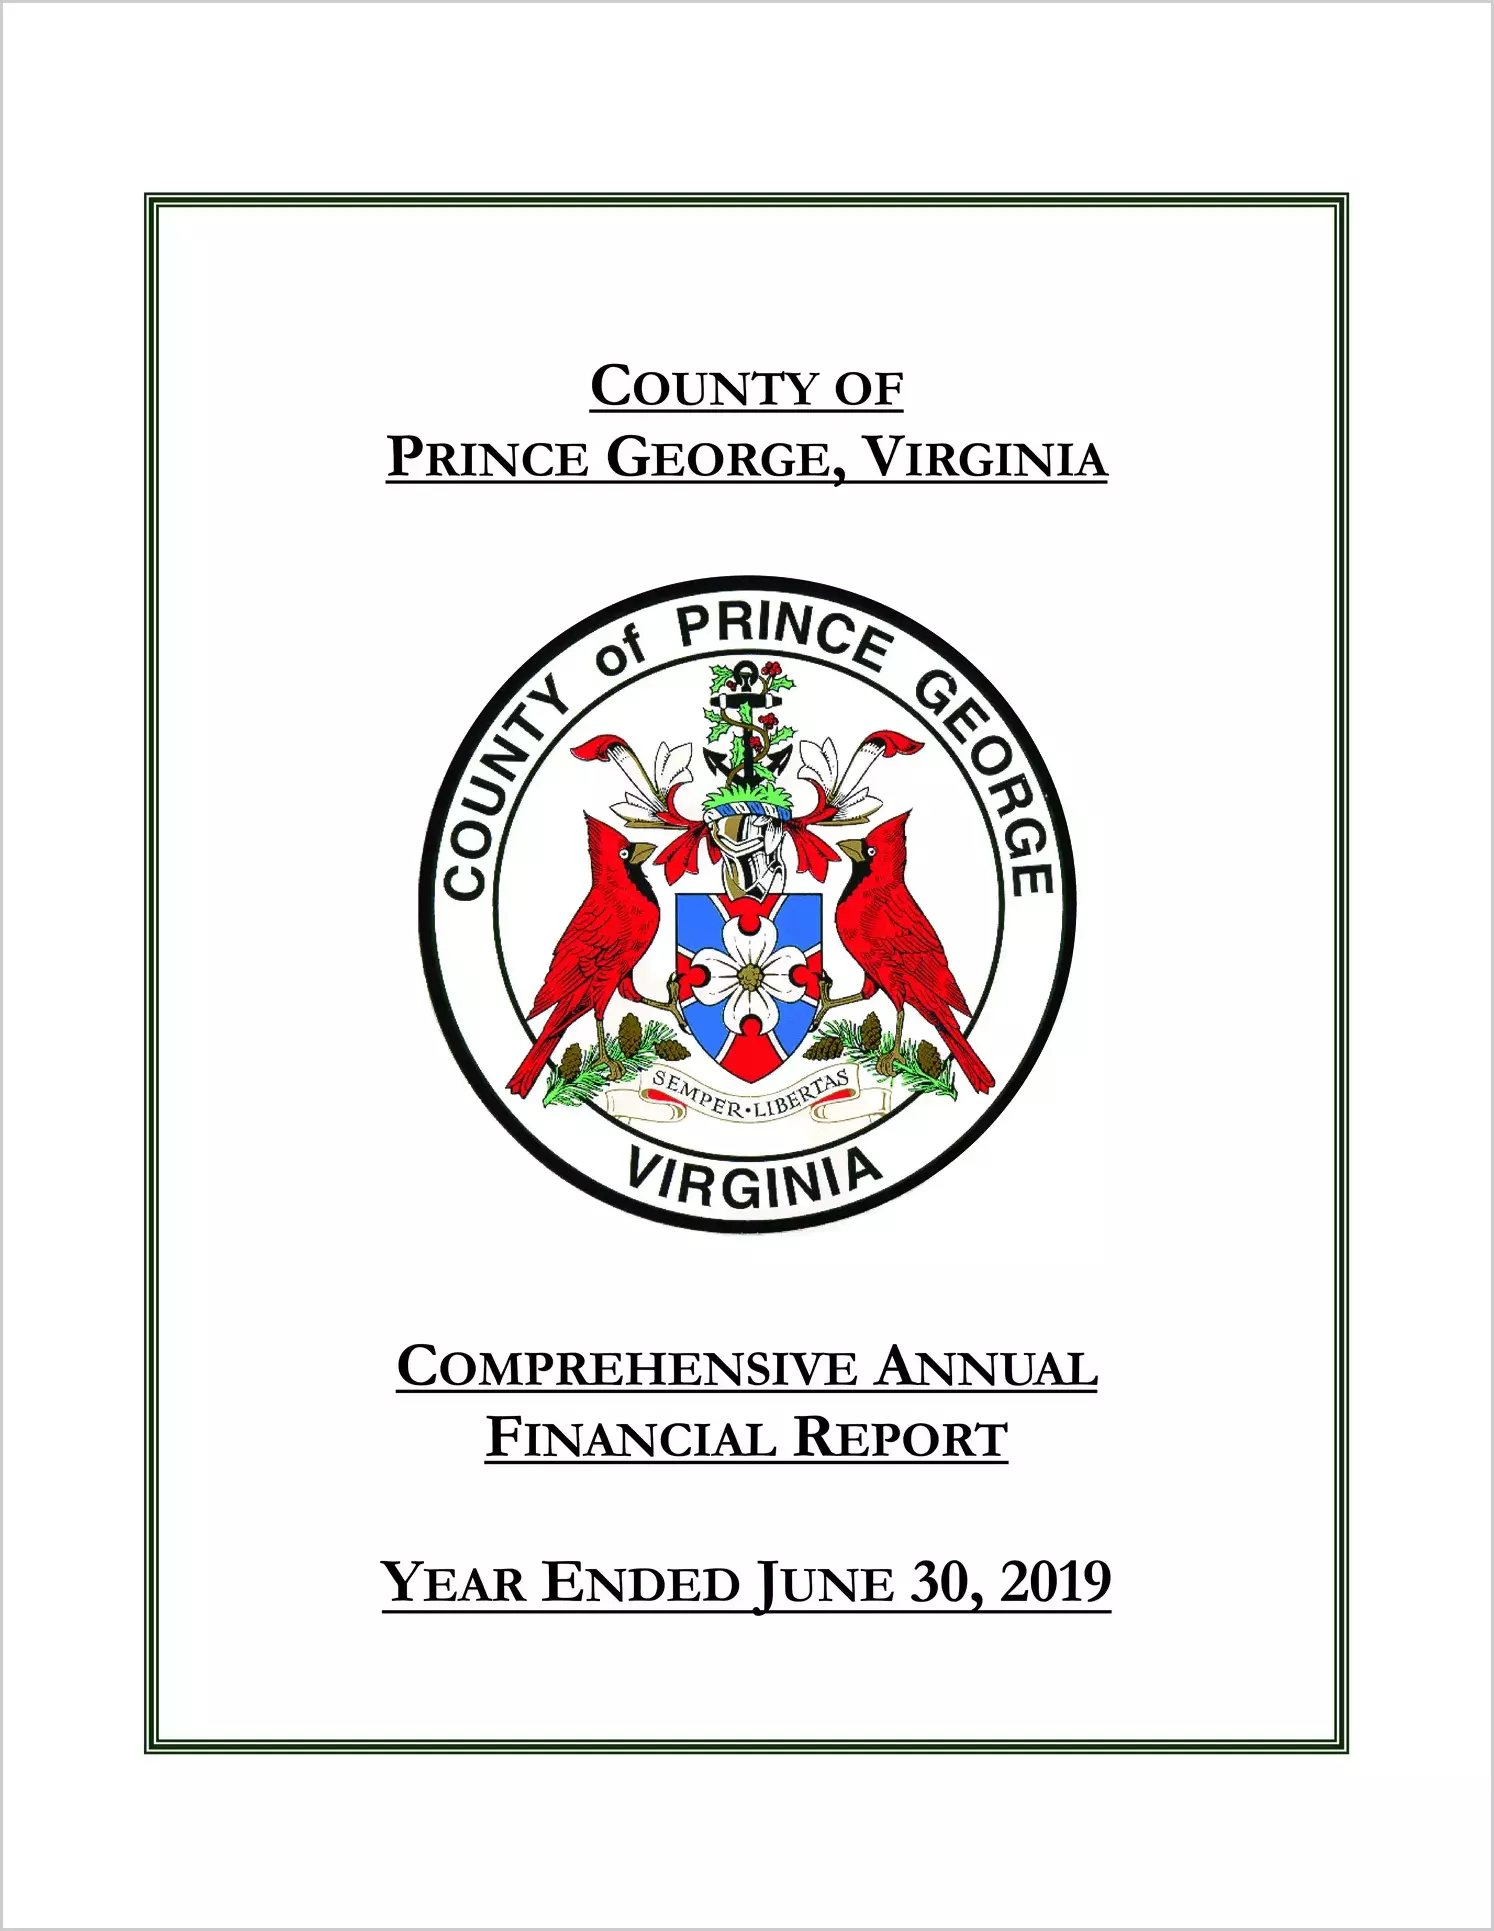 2019 Annual Financial Report for County of Prince George